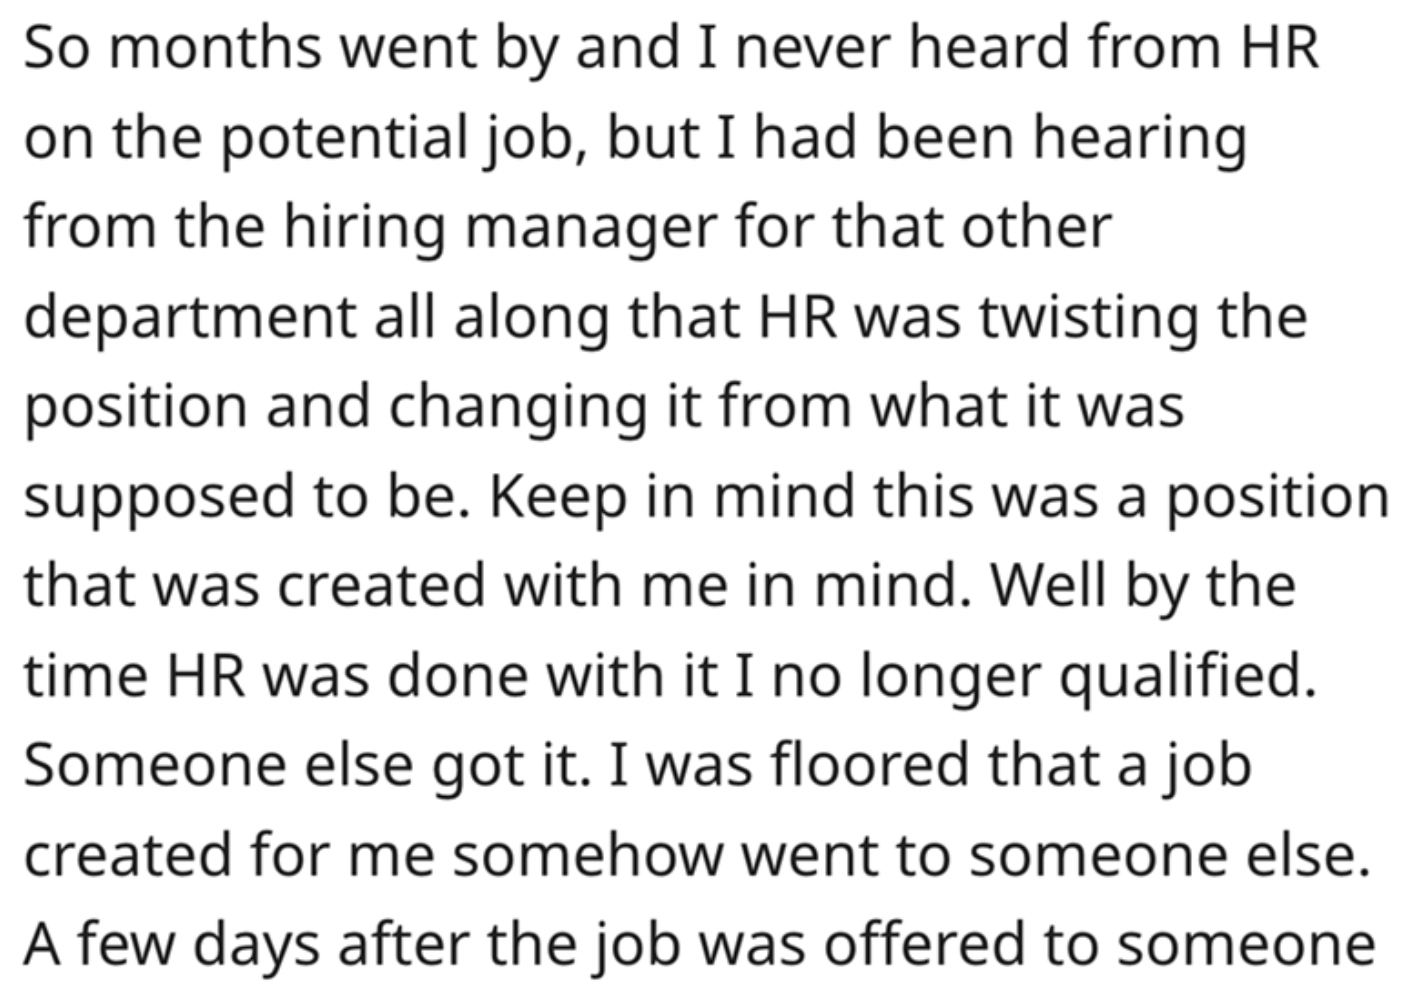 handwriting - So months went by and I never heard from Hr on the potential job, but I had been hearing from the hiring manager for that other department all along that Hr was twisting the position and changing it from what it was supposed to be. Keep in m